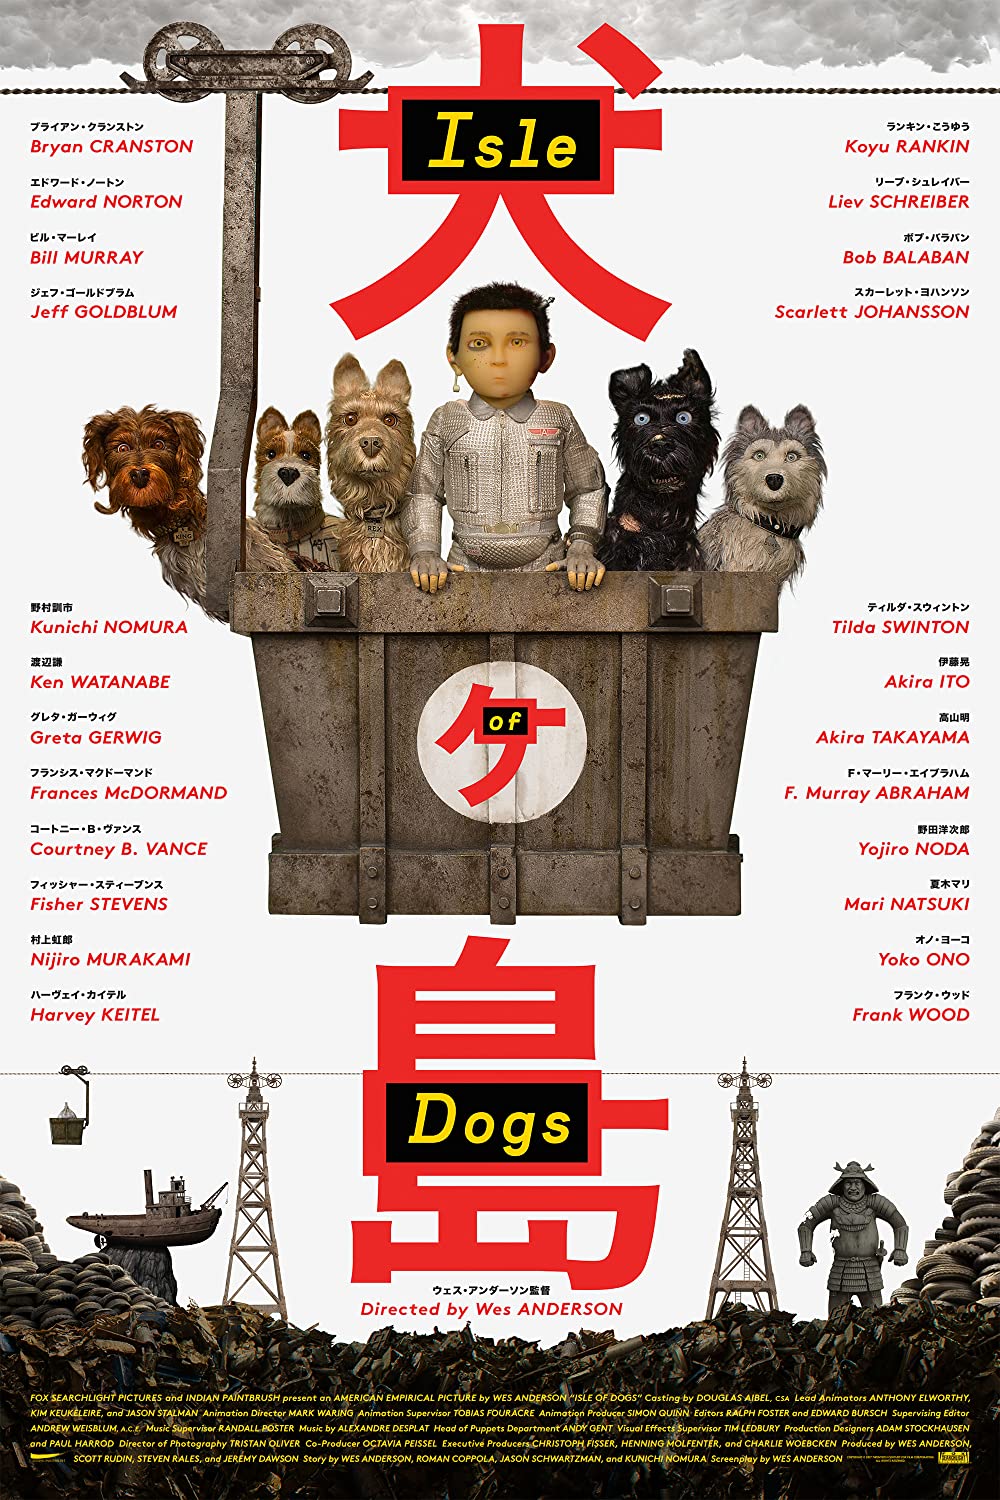 "Isle of Dogs" film poster with picture of dogs and a character in a gondala